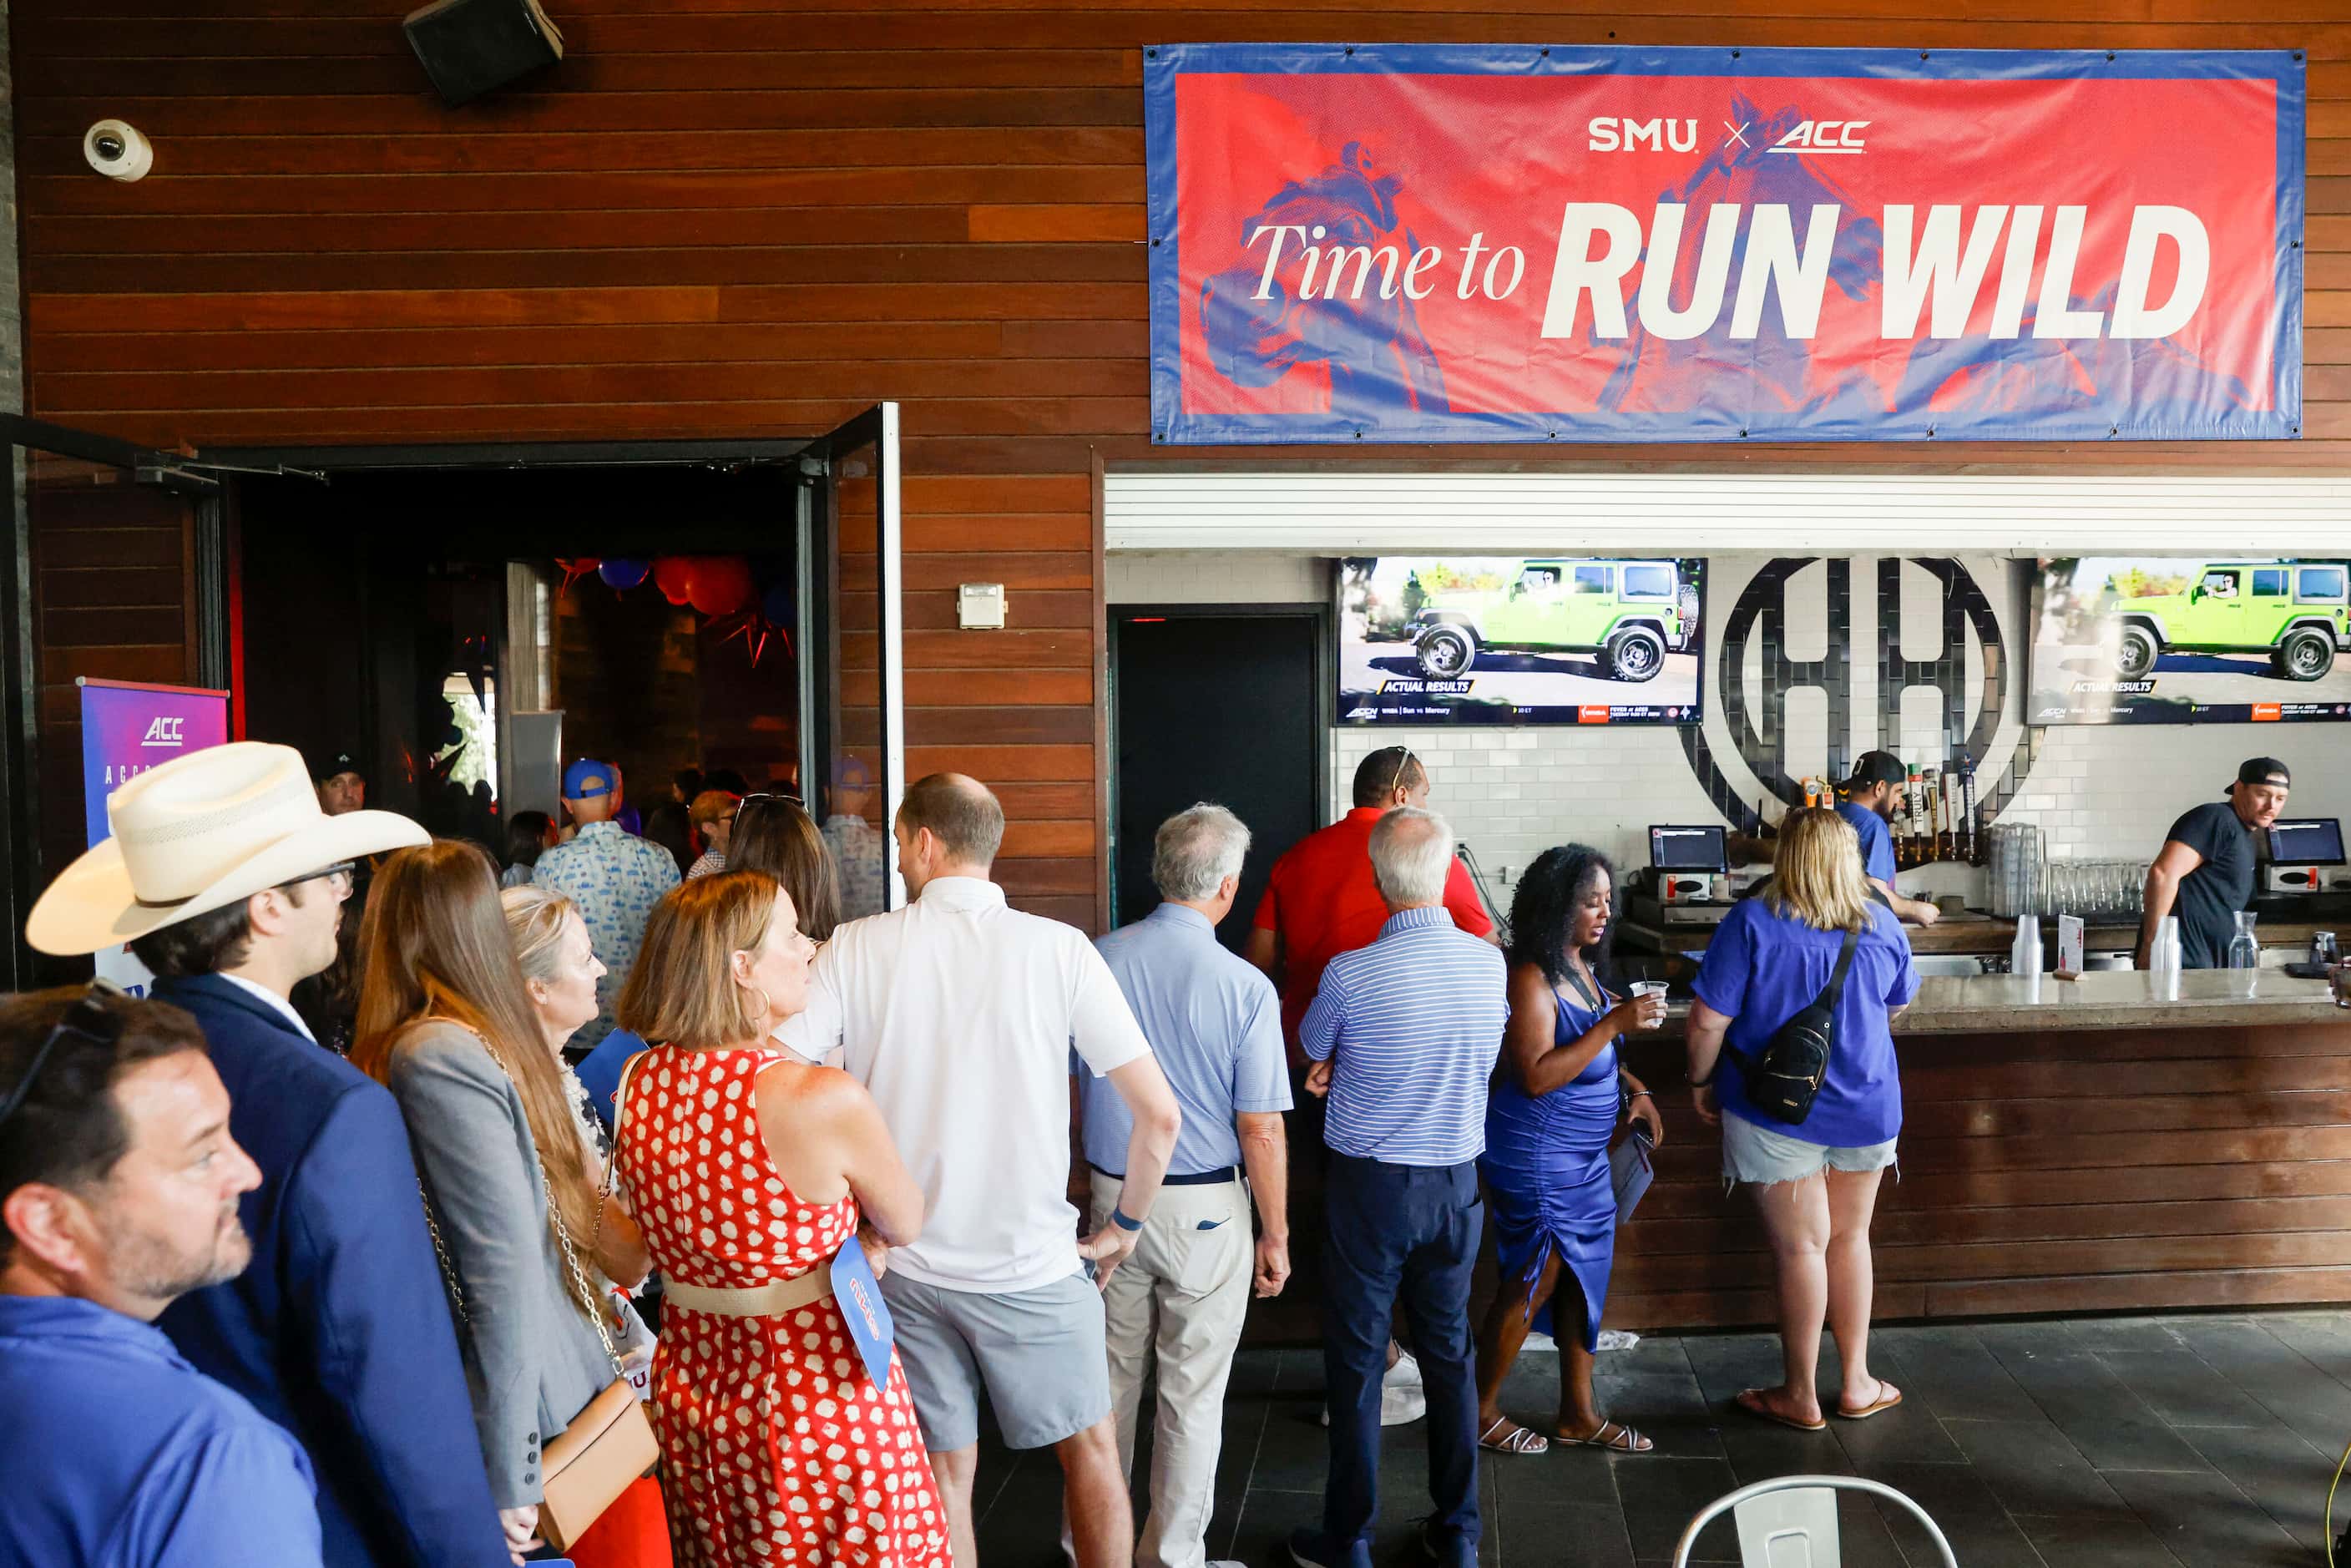 SMU alumni and supporters gather during a celebration of SMU’s first day in the ACC at...